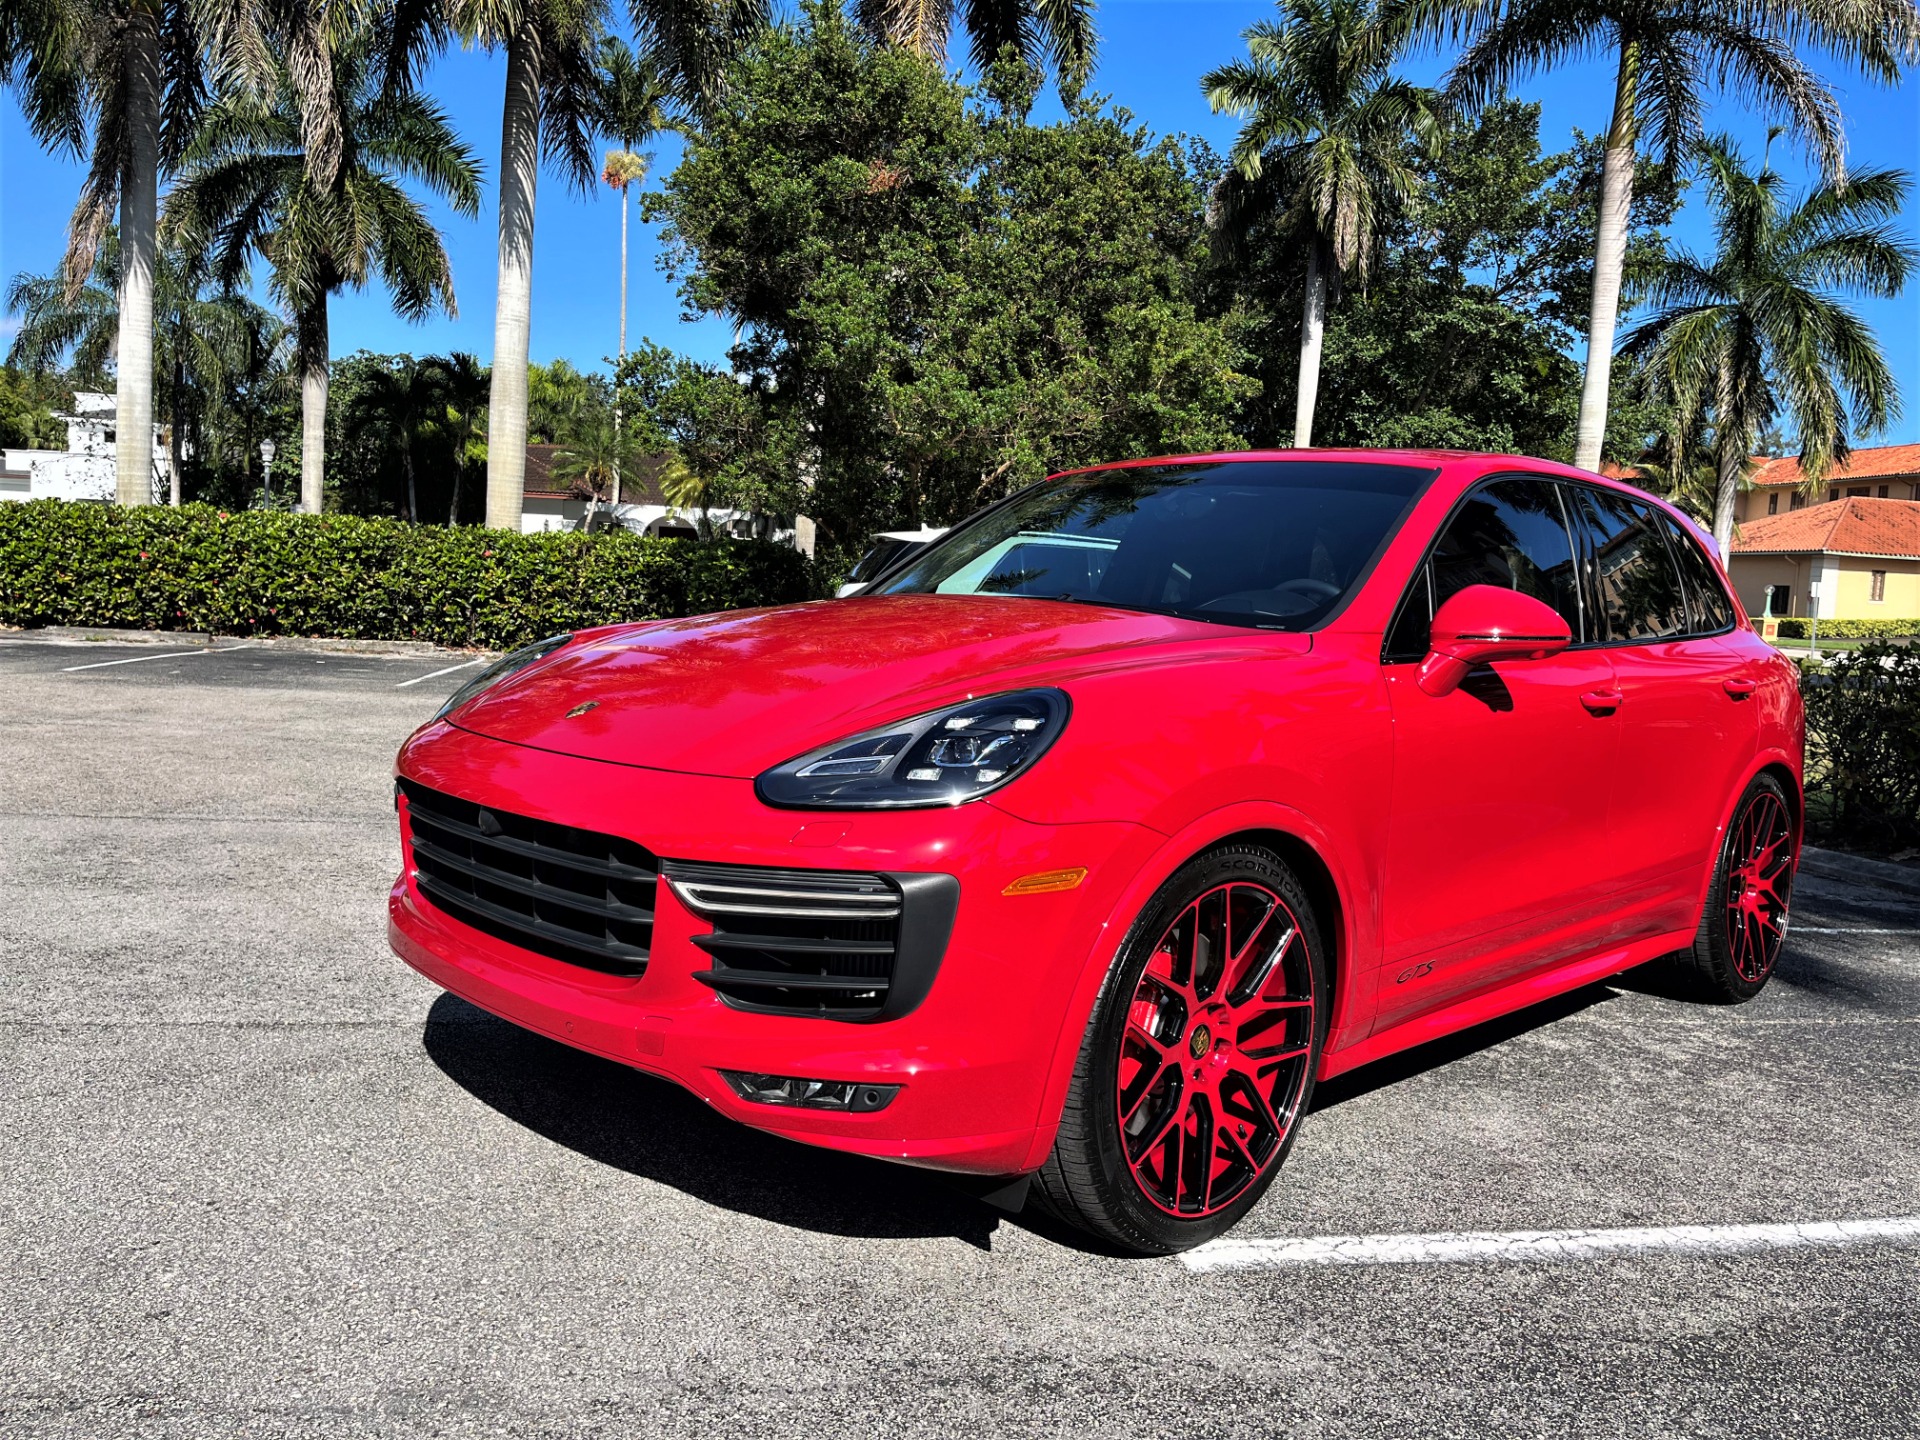 Used 2017 Porsche Cayenne GTS for sale Sold at The Gables Sports Cars in Miami FL 33146 4